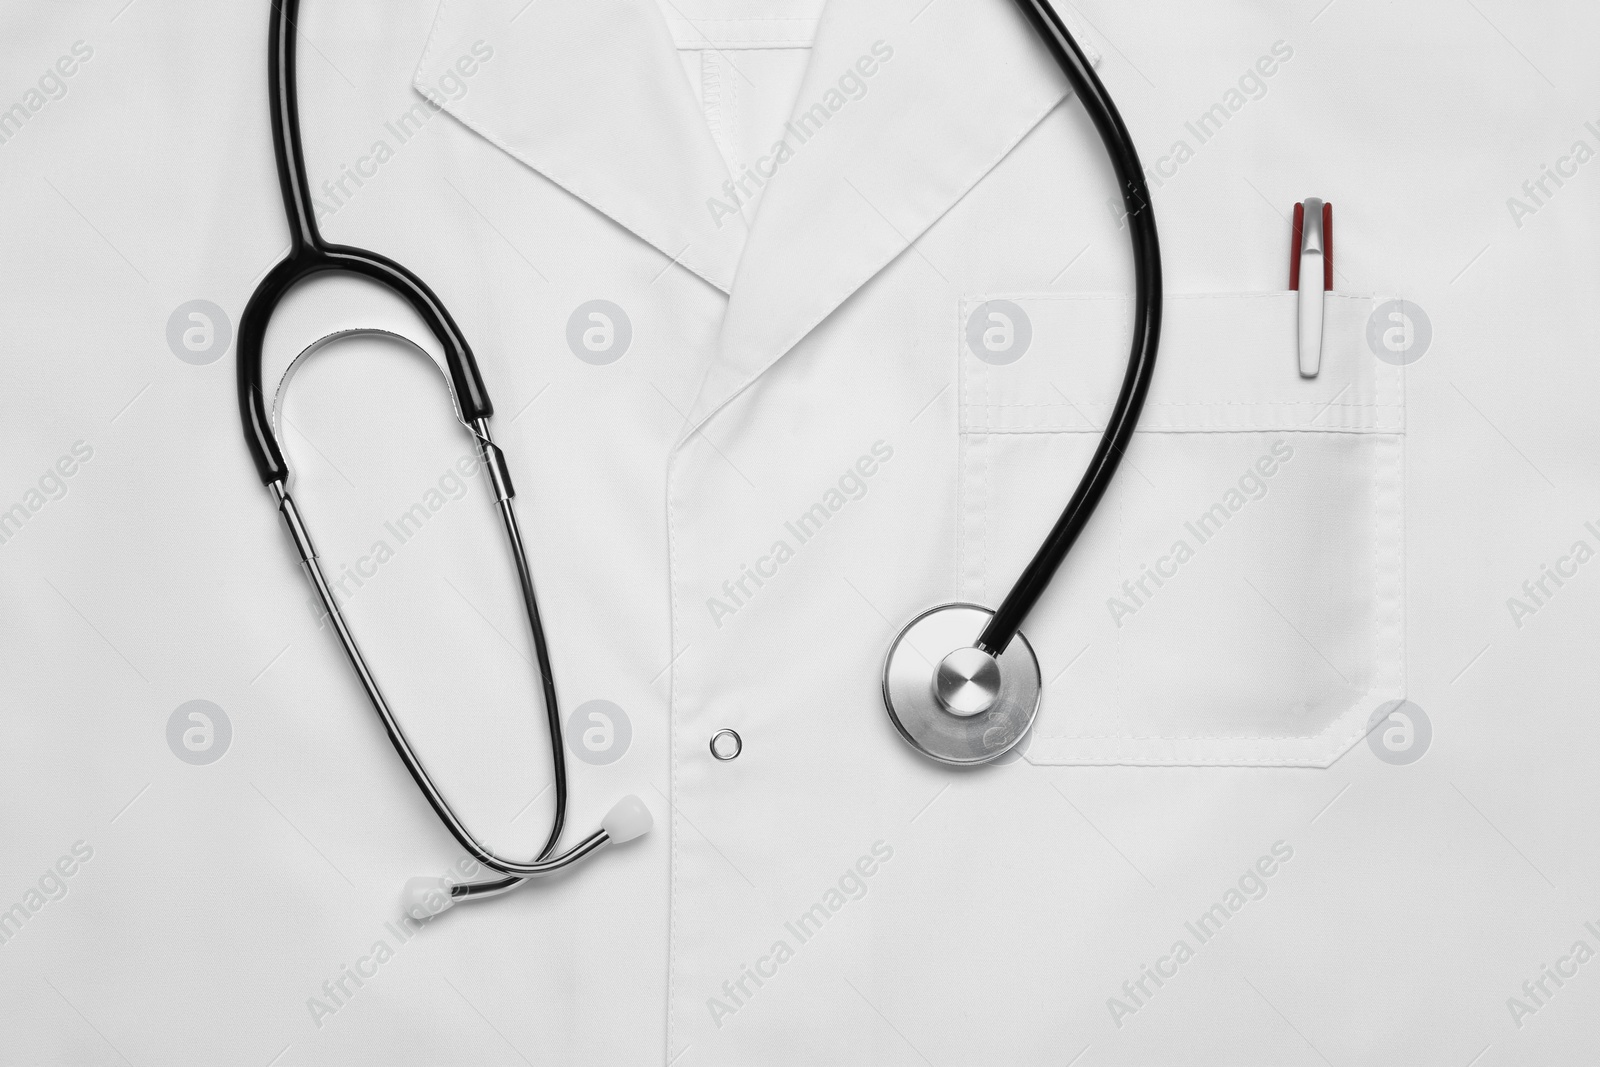 Photo of Stethoscope on white medical uniform, top view